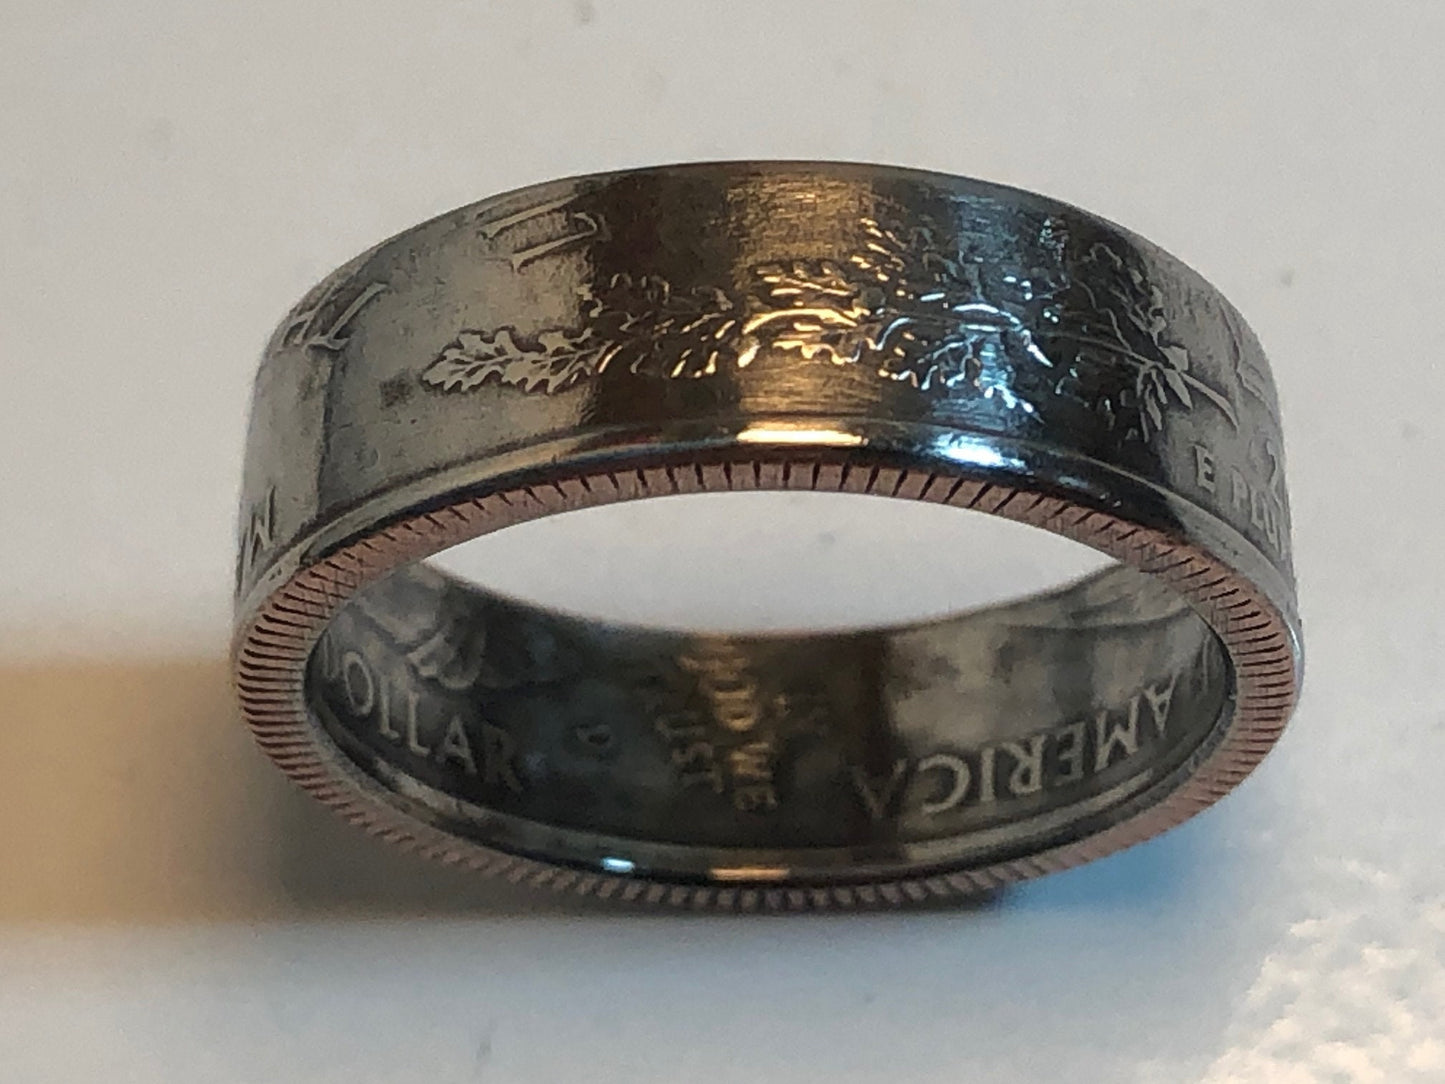 Maryland Ring State Quarter Coin Ring